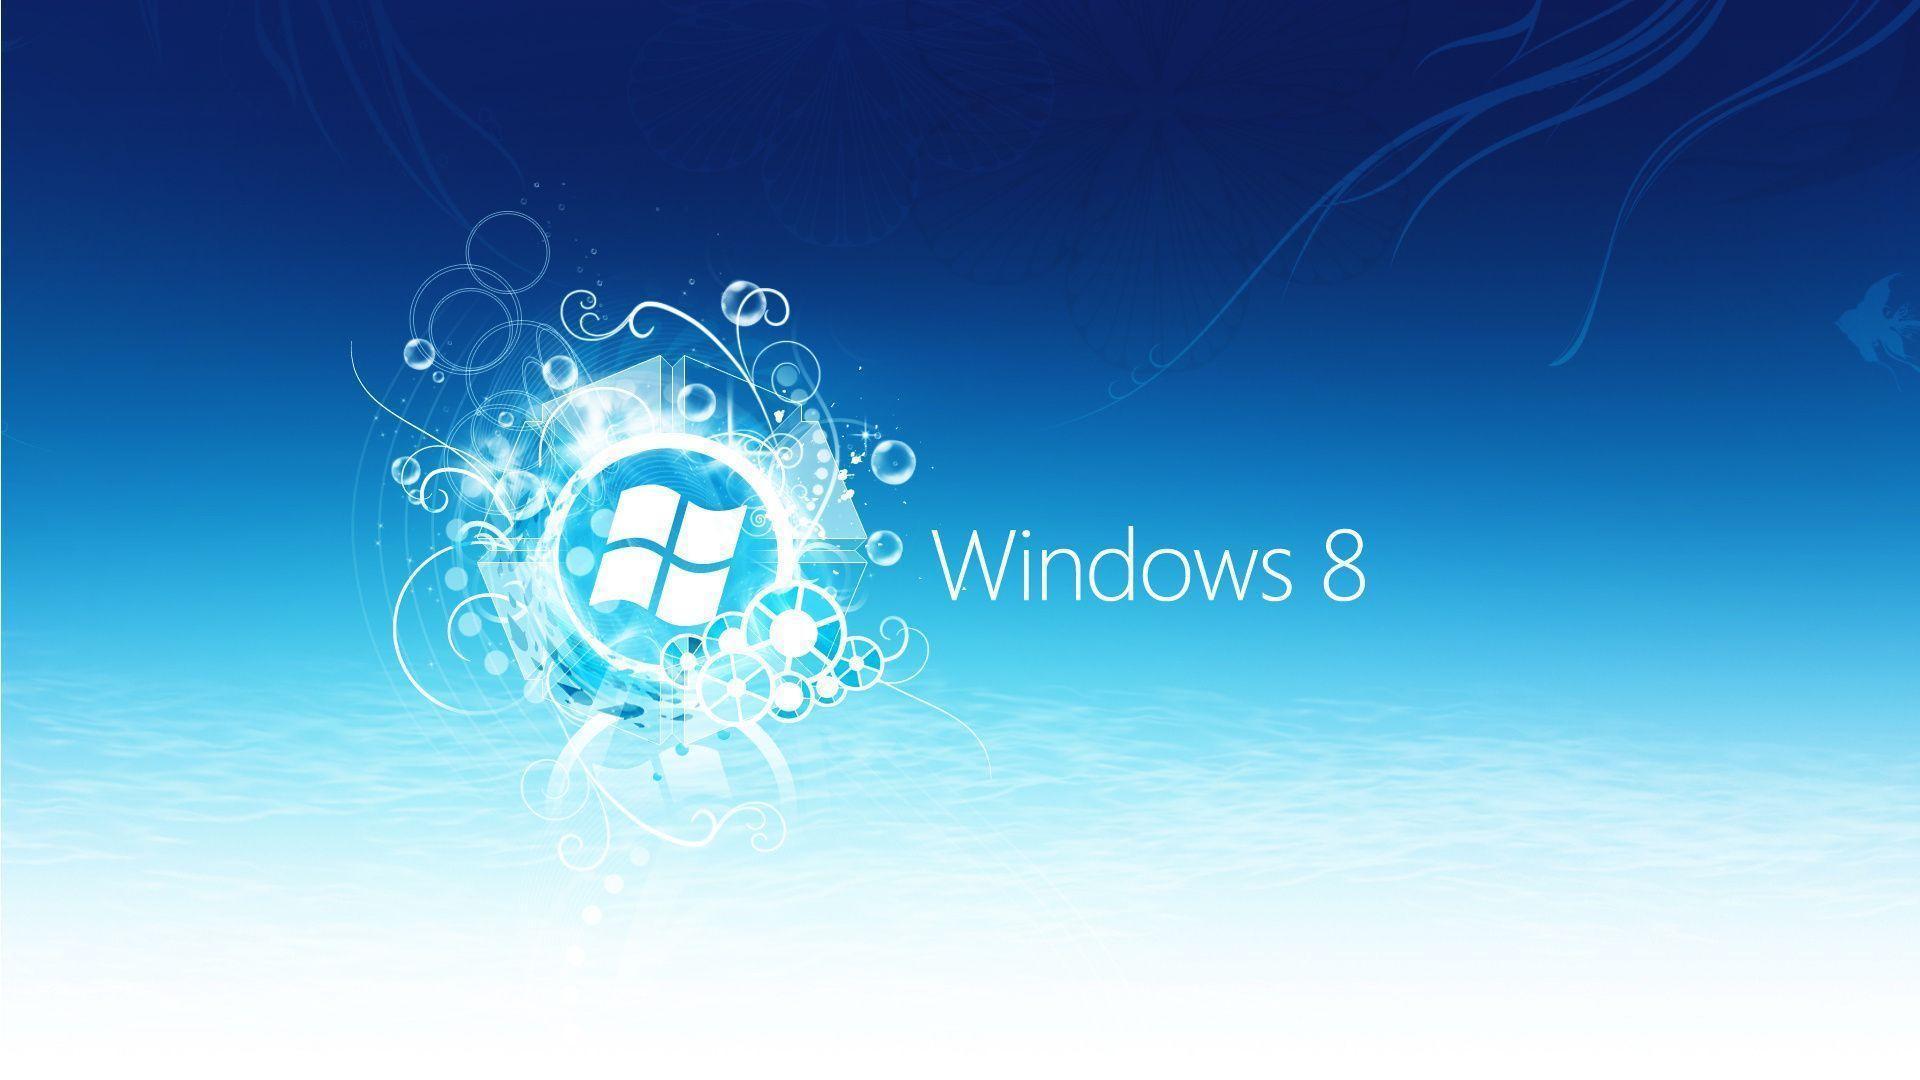 Windows 8 HD Wallpapers - Wallpaper Cave Full Hd Wallpapers For Windows 8 1920x1080